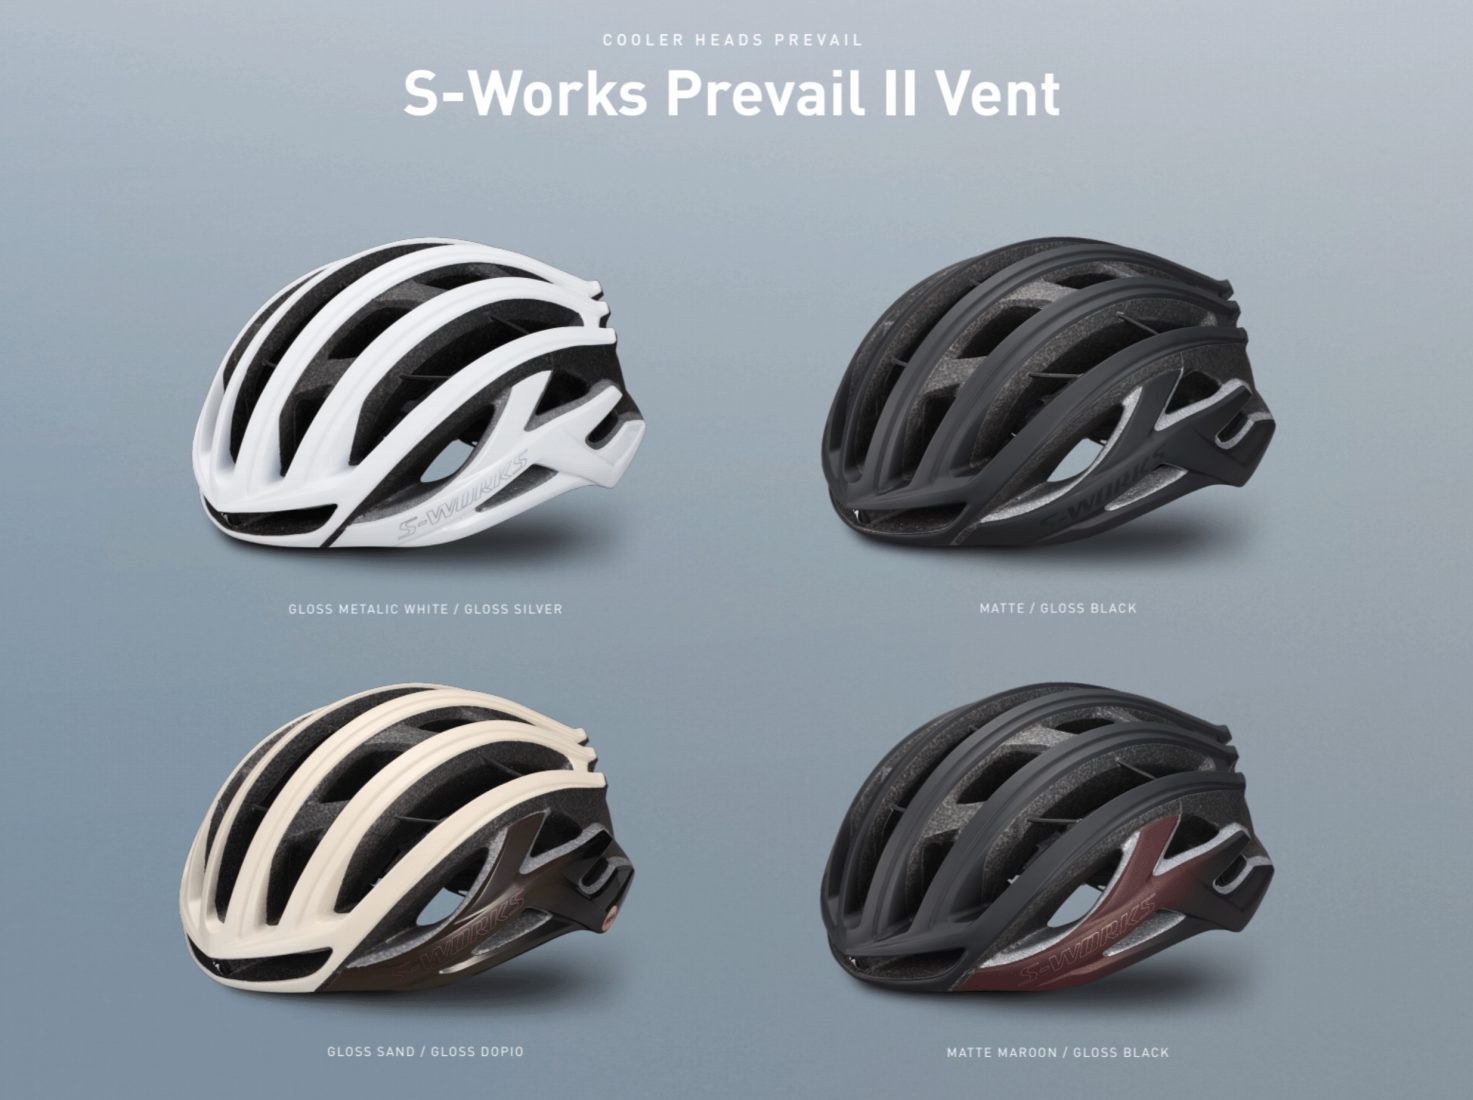 Nuovo casco Specialized S'Works Prevail II Vent con ANGI